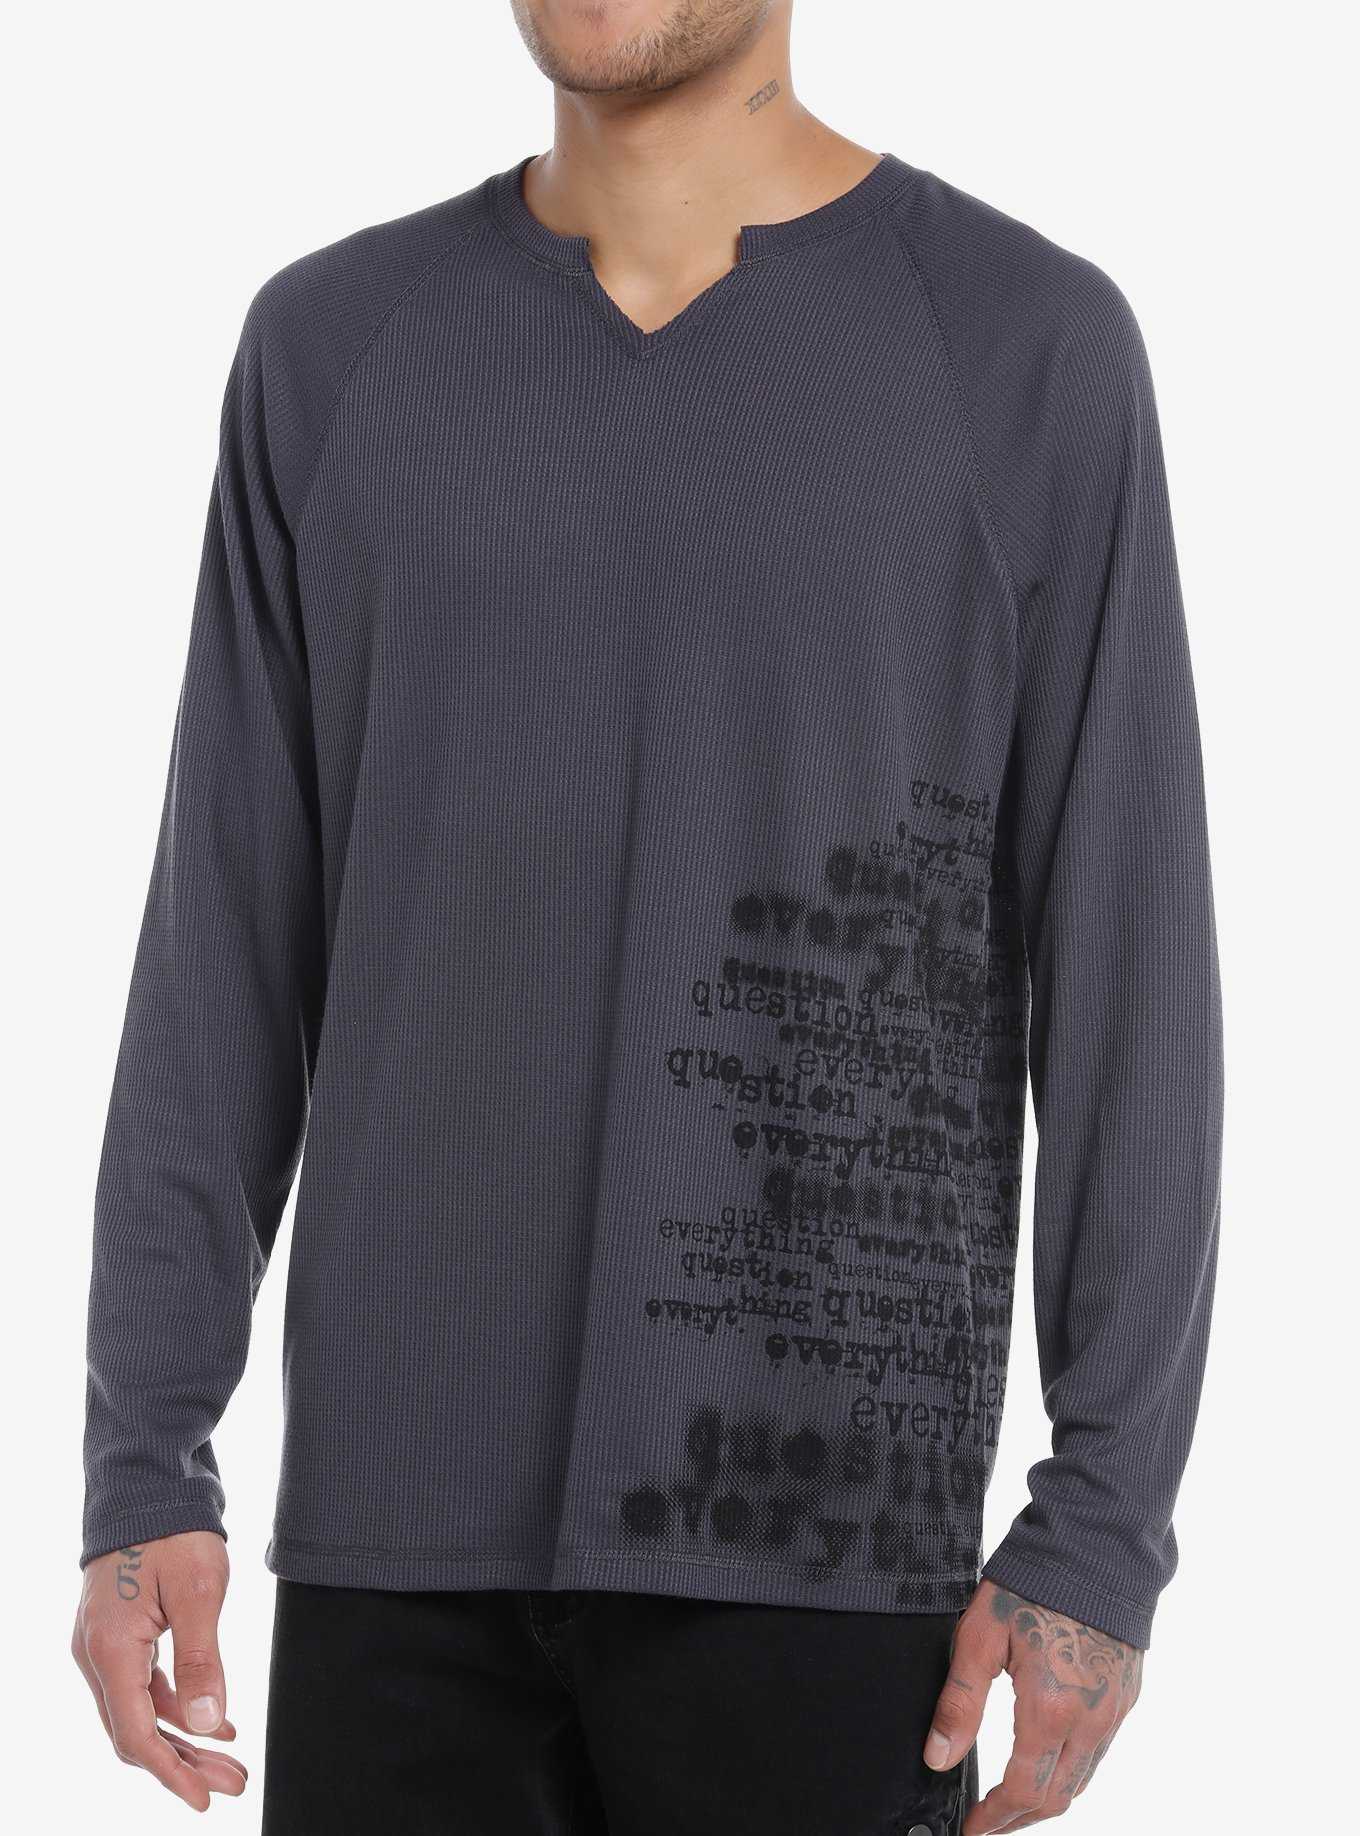 Social Collision® Question Everything Henley Long-Sleeve Top, , hi-res